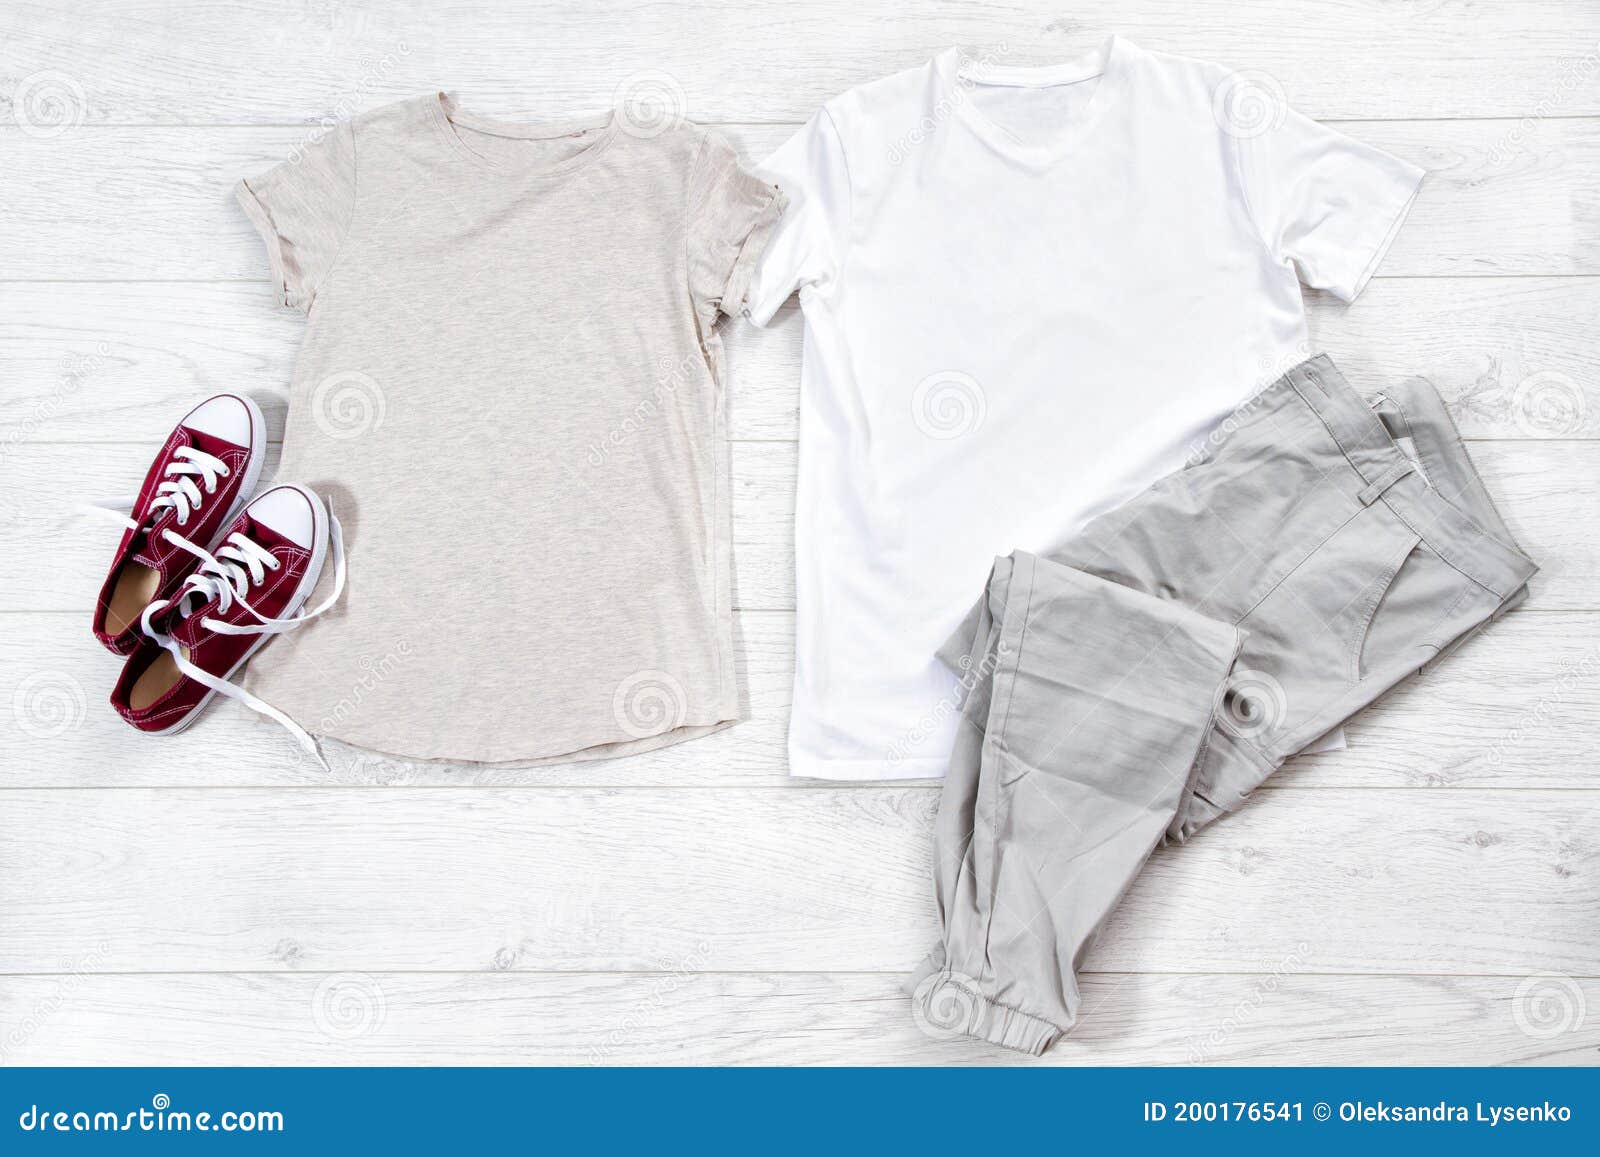 Male and Female T Shirt White and Sneakers. T-shirt Mockup Flat Lay ...